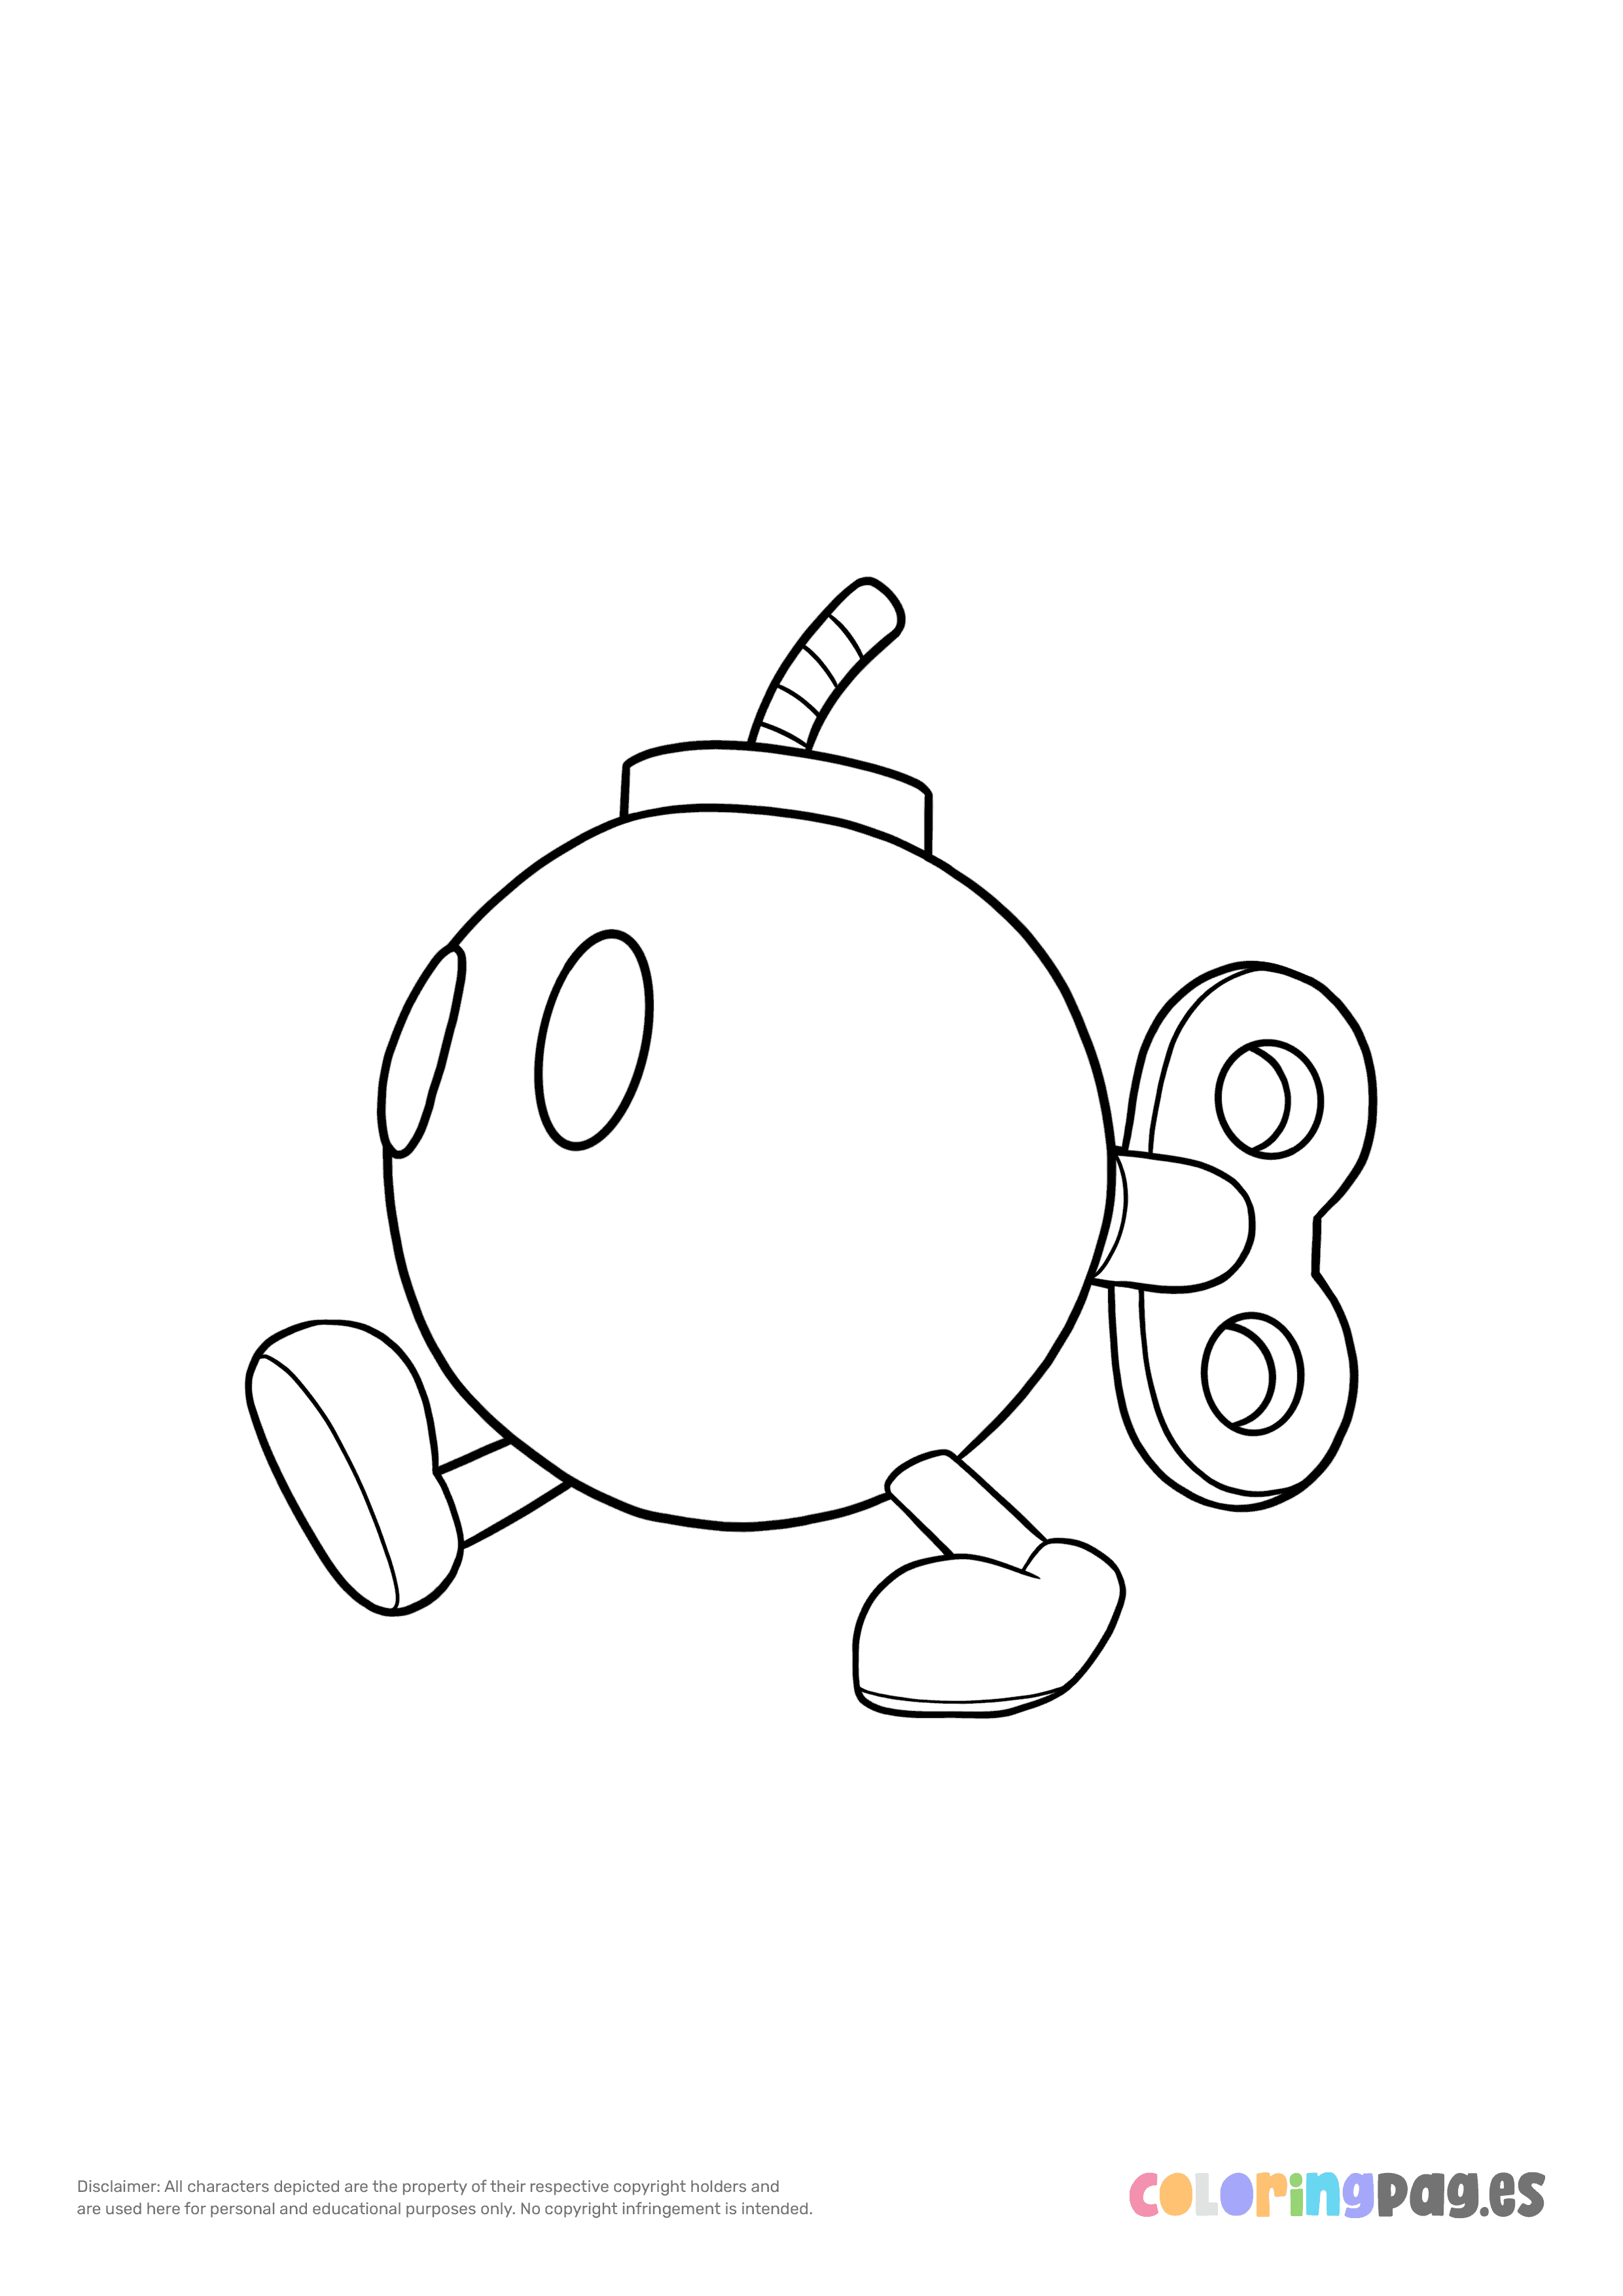 Bop-Omb coloring page